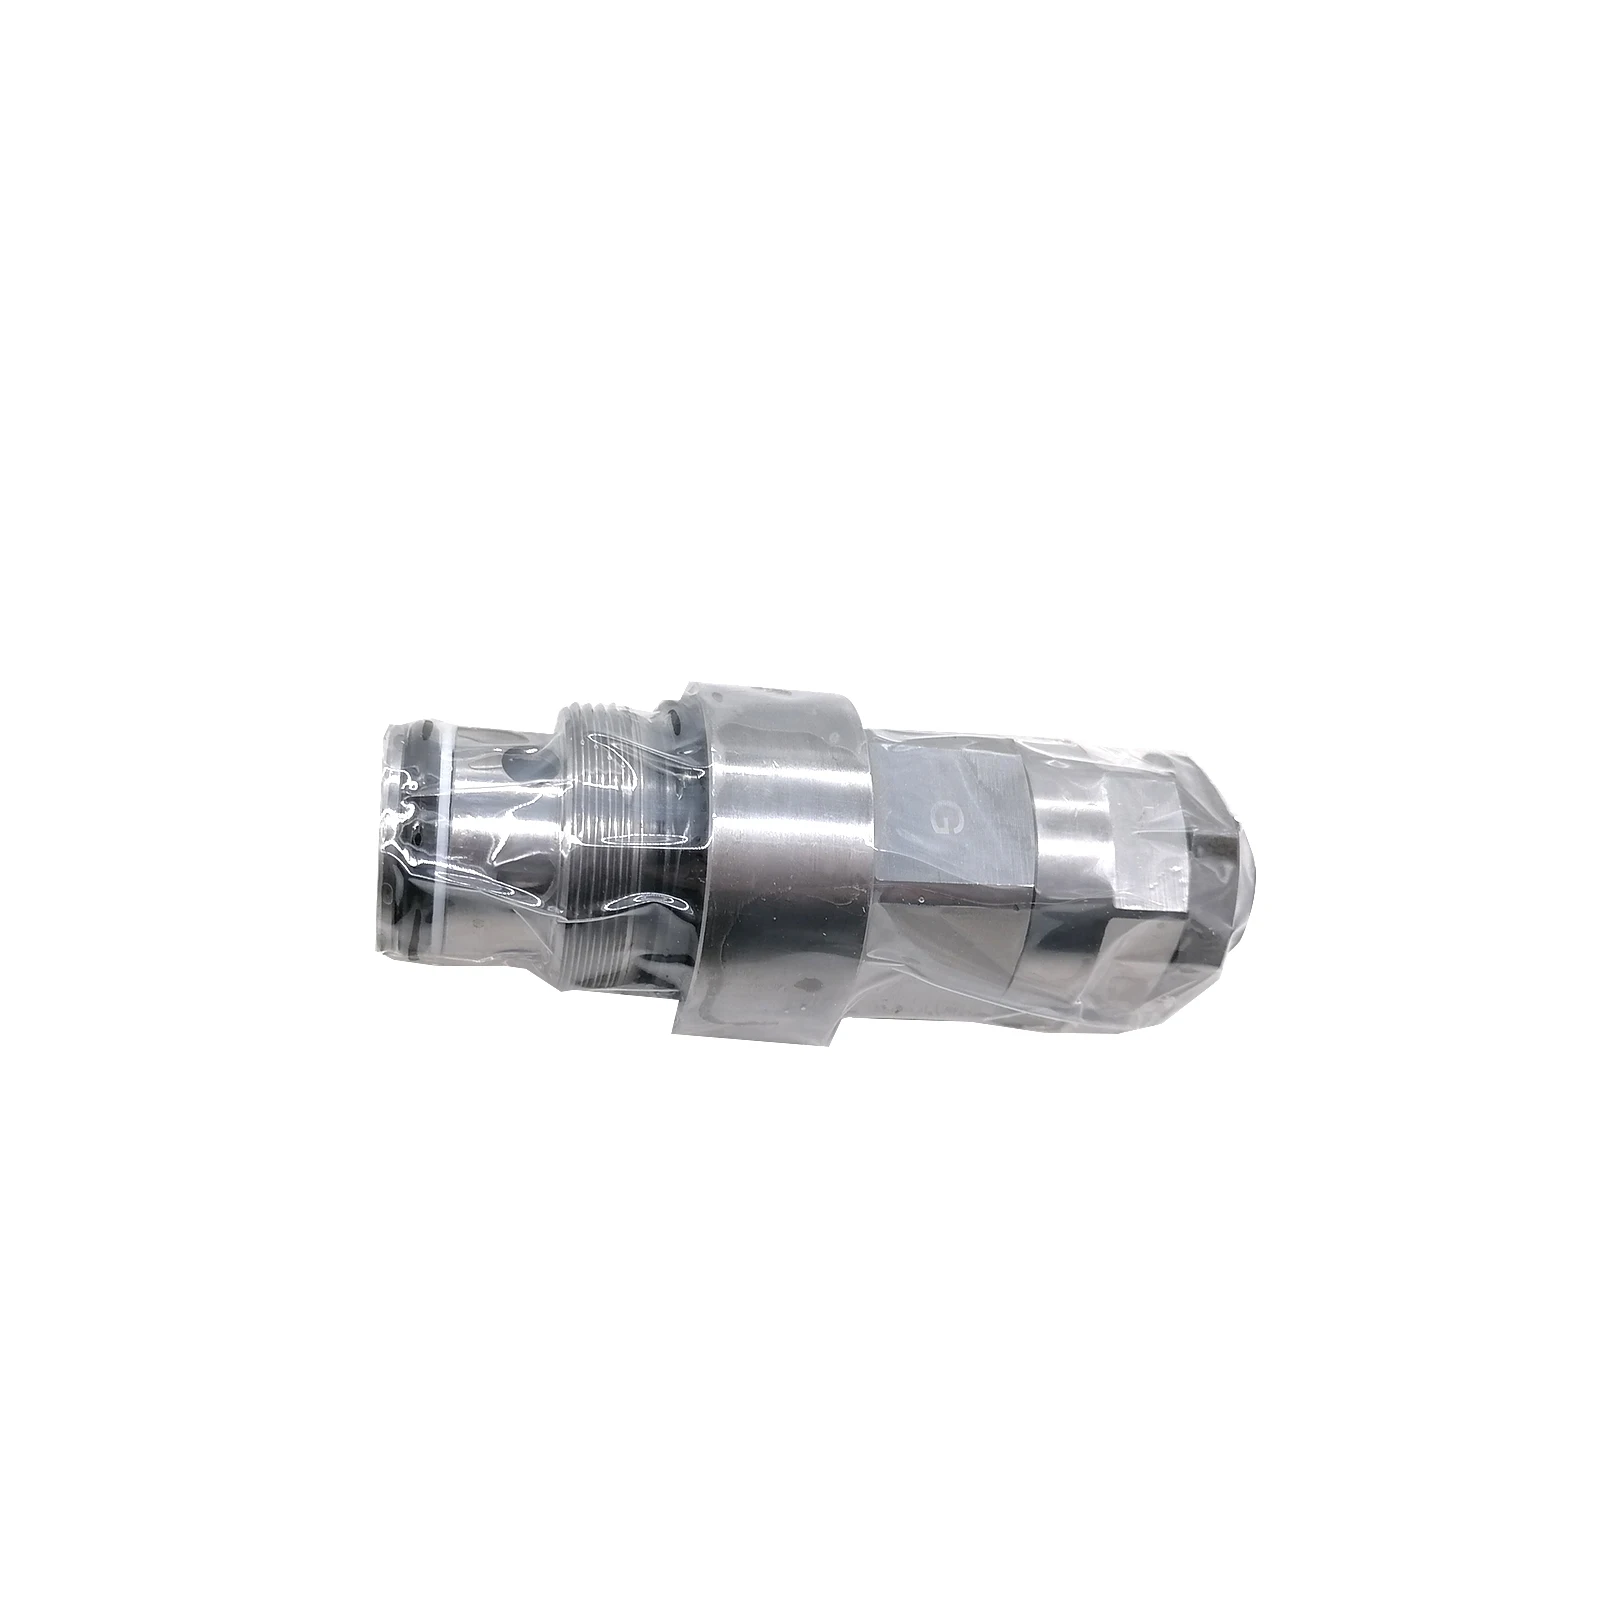 

TOPVELSUN XKBF-01293 High Quality Pressure Relief Valve Compatible with Hyundai R160-9 R210-9 R210LC-9 R210W-9S R260LC-9